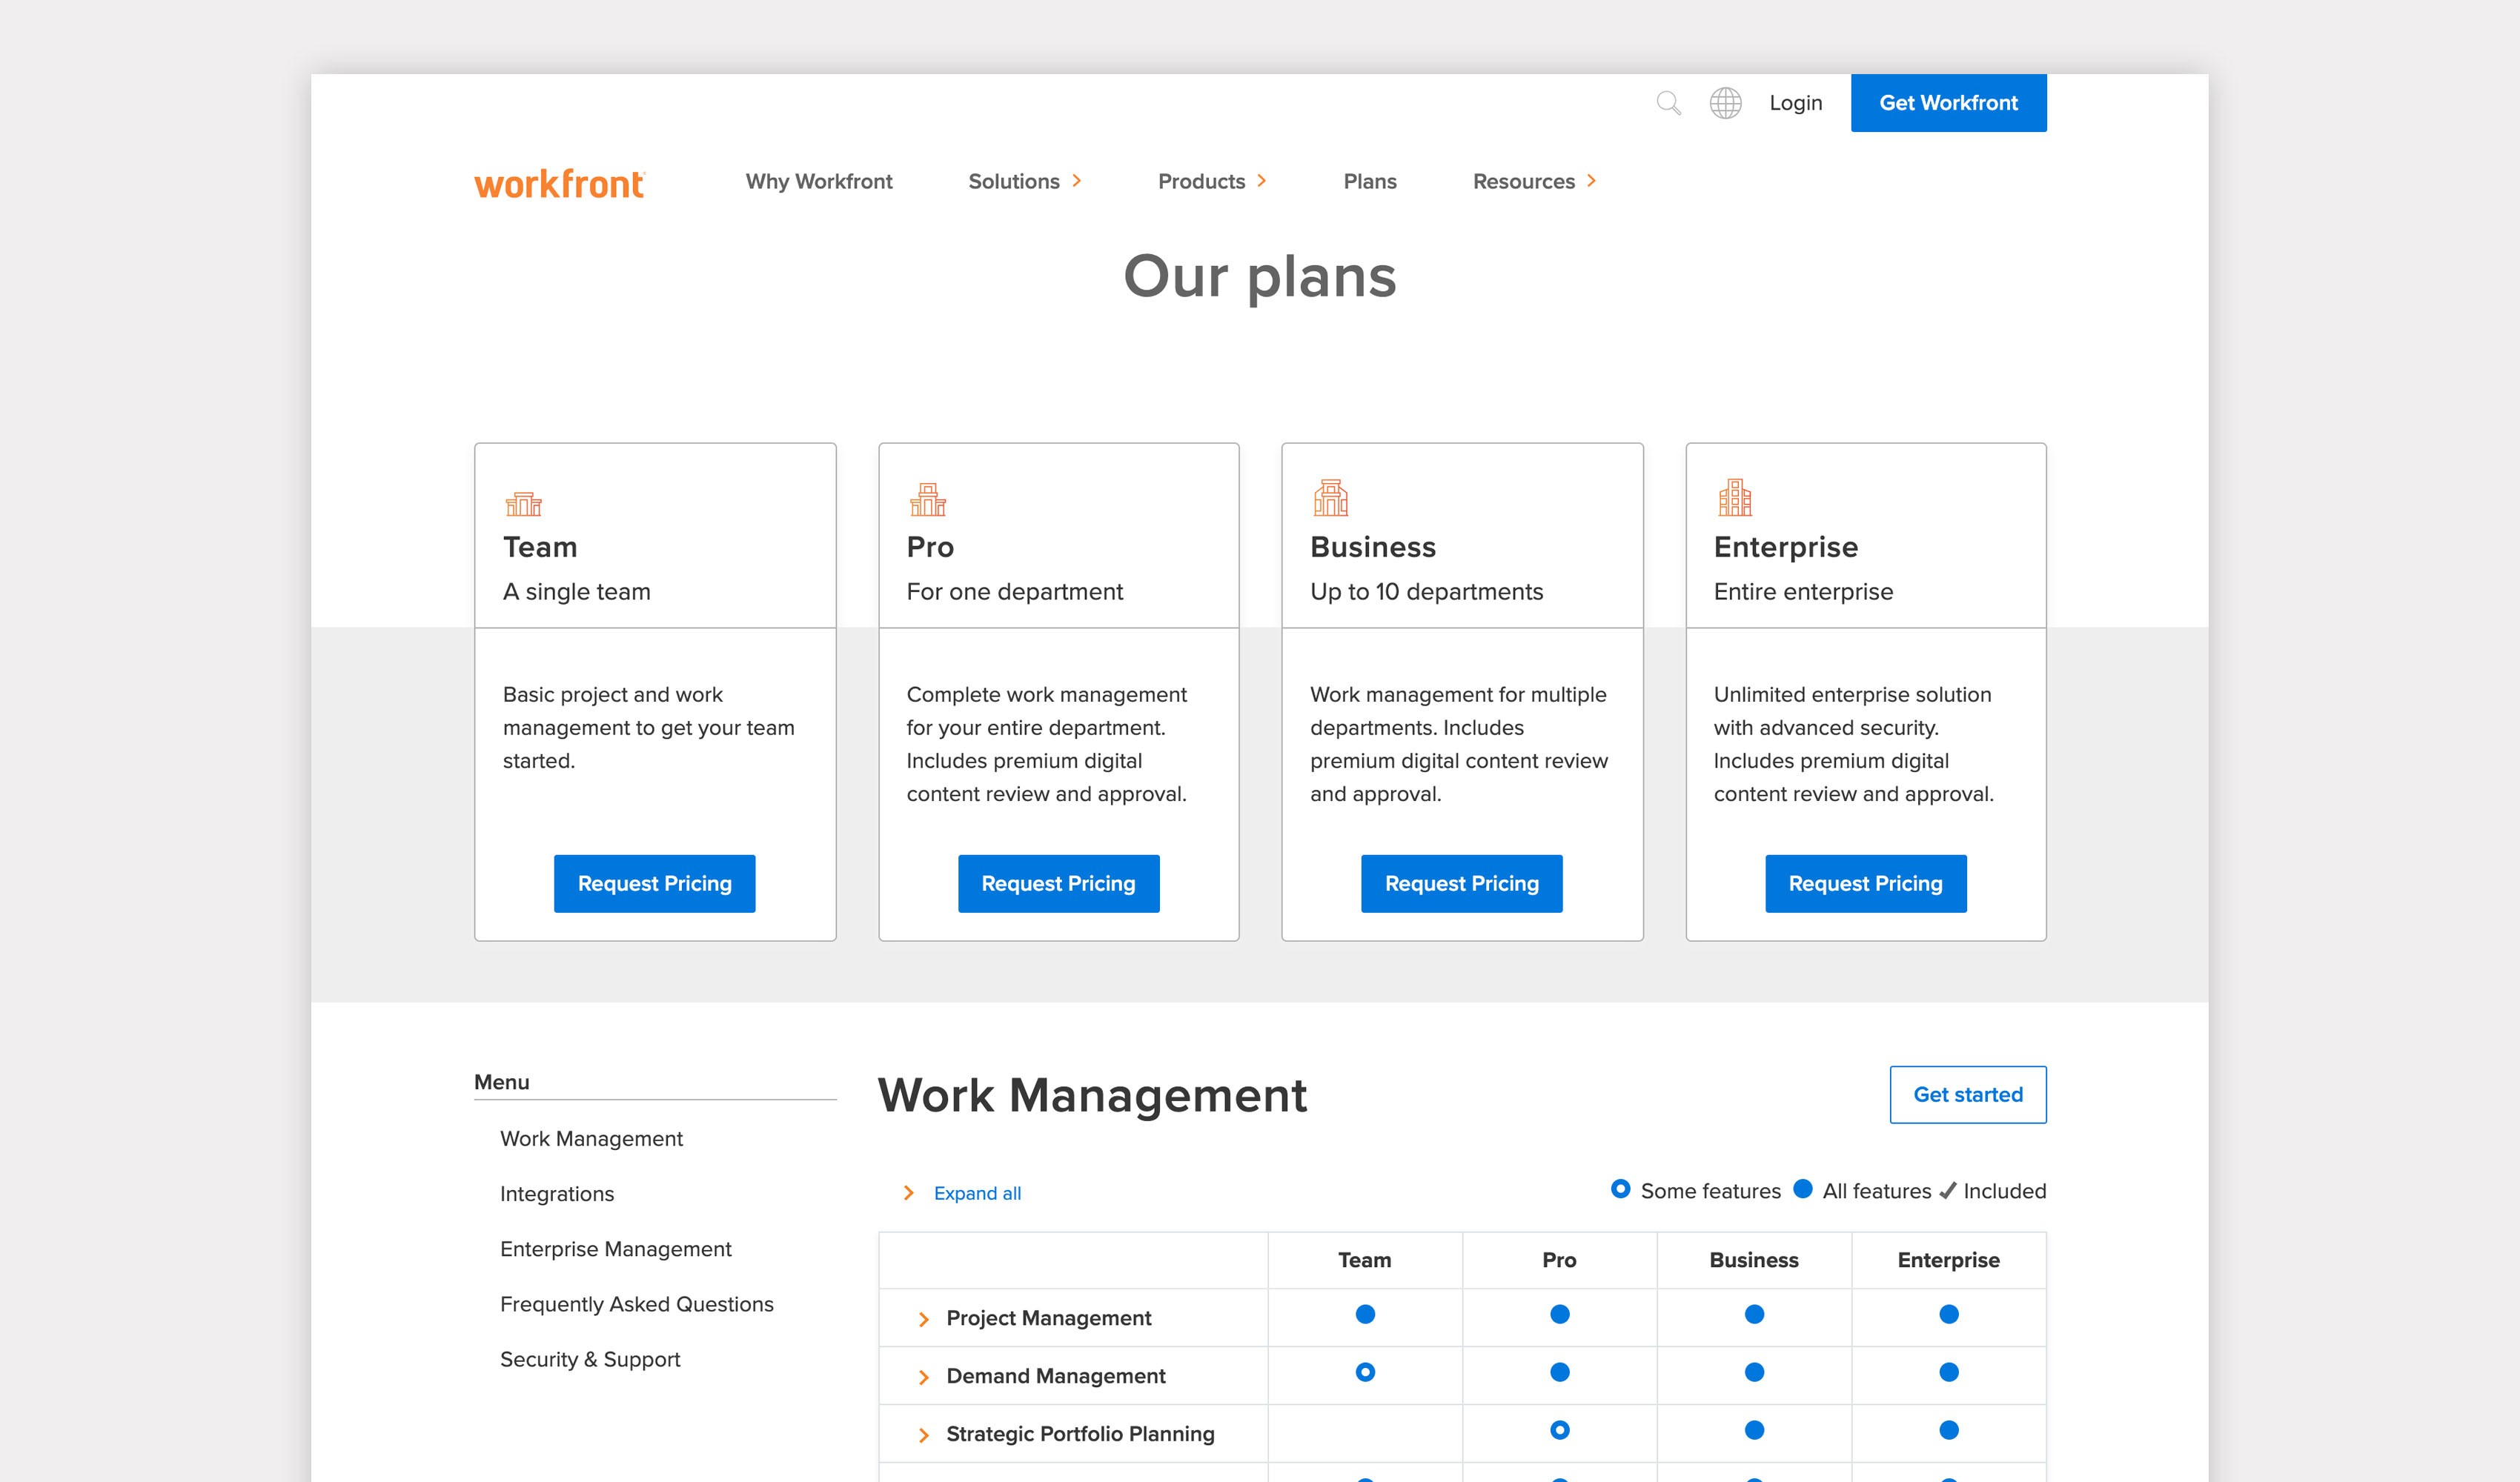 Pricing page with pricing options for Team, Pro, Business and Enterprise, as well as a feature comparison table for them.